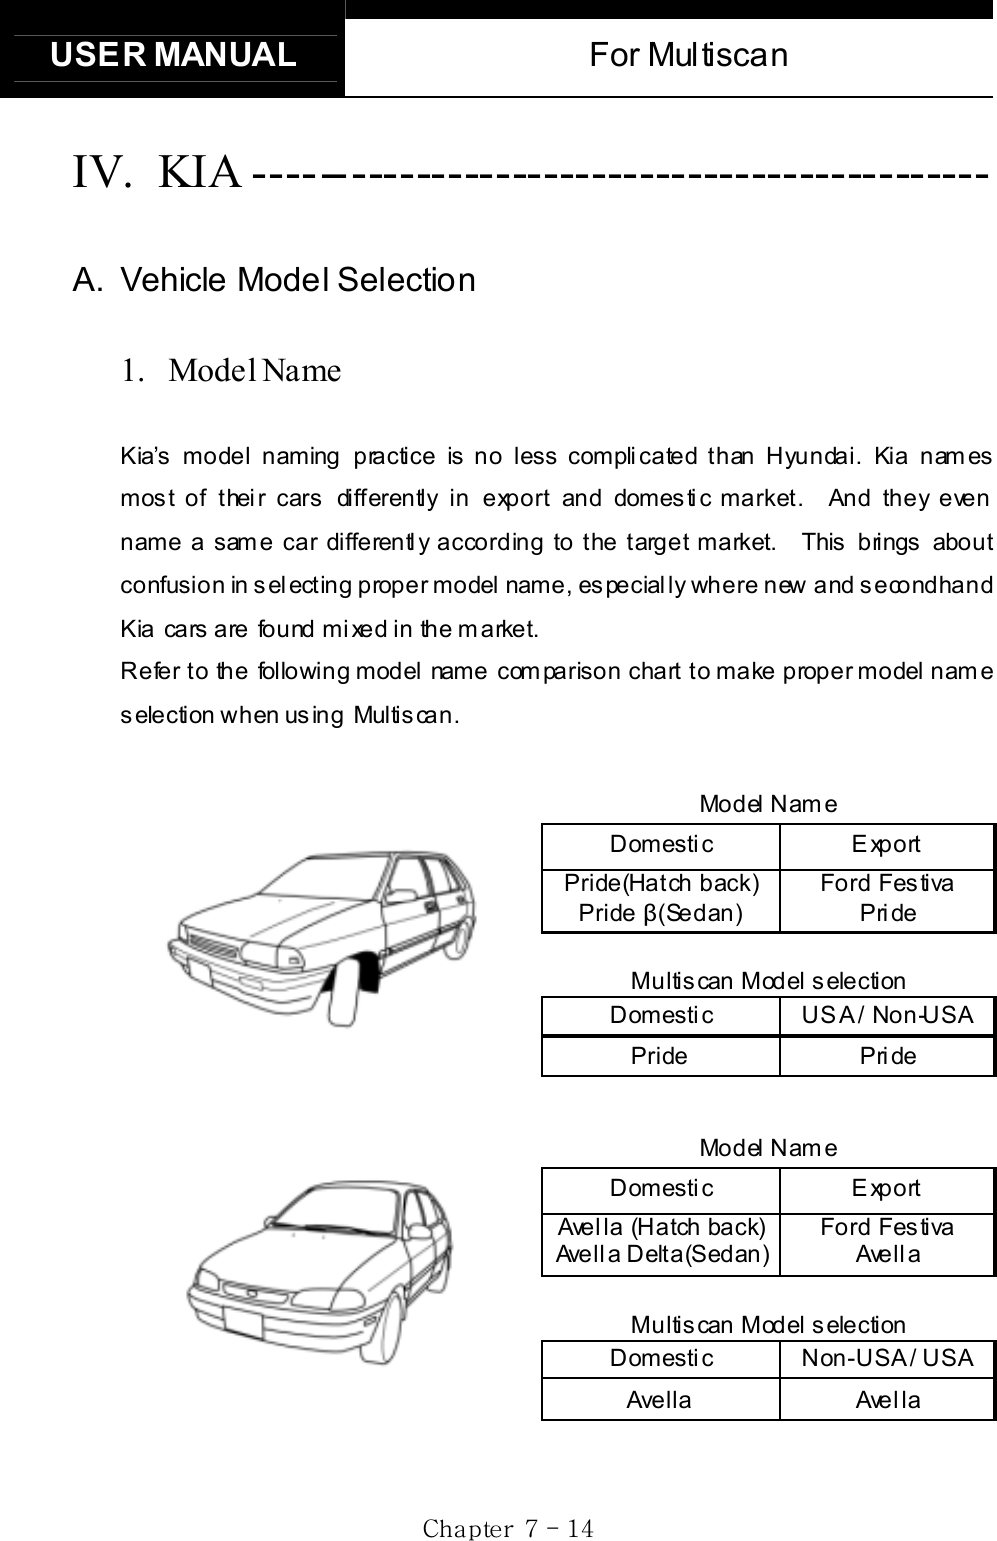 USER MANUAL  For Multiscan Gj  G^G TGX[GIV. KIA ---------------------------------------------- A.  Vehicle Model Selection 1. Model Name  GKia’s model naming practice is no less complicated than Hyundai. Kia names most of their cars differently in export and domestic market.  And they even name a same car differently according to the target market.   This brings about confusion in selecting proper model name, especially where  new and secondhand Kia cars are found mixed in the market. Refer to the following model name comparison chart to make proper model name selection when using  Multiscan. Model Name Domestic Export Pride(Hatch back) Pride ȕ(Sedan) Ford Festiva Pride Multiscan Model selection Domestic  USA / Non-USA Pride Pride Model Name Domestic Export Avella (Hatch back) Avella Delta(Sedan) Ford Festiva Ave ll a  Multiscan Model selection Domestic Non-USA / USA Avella Avella 